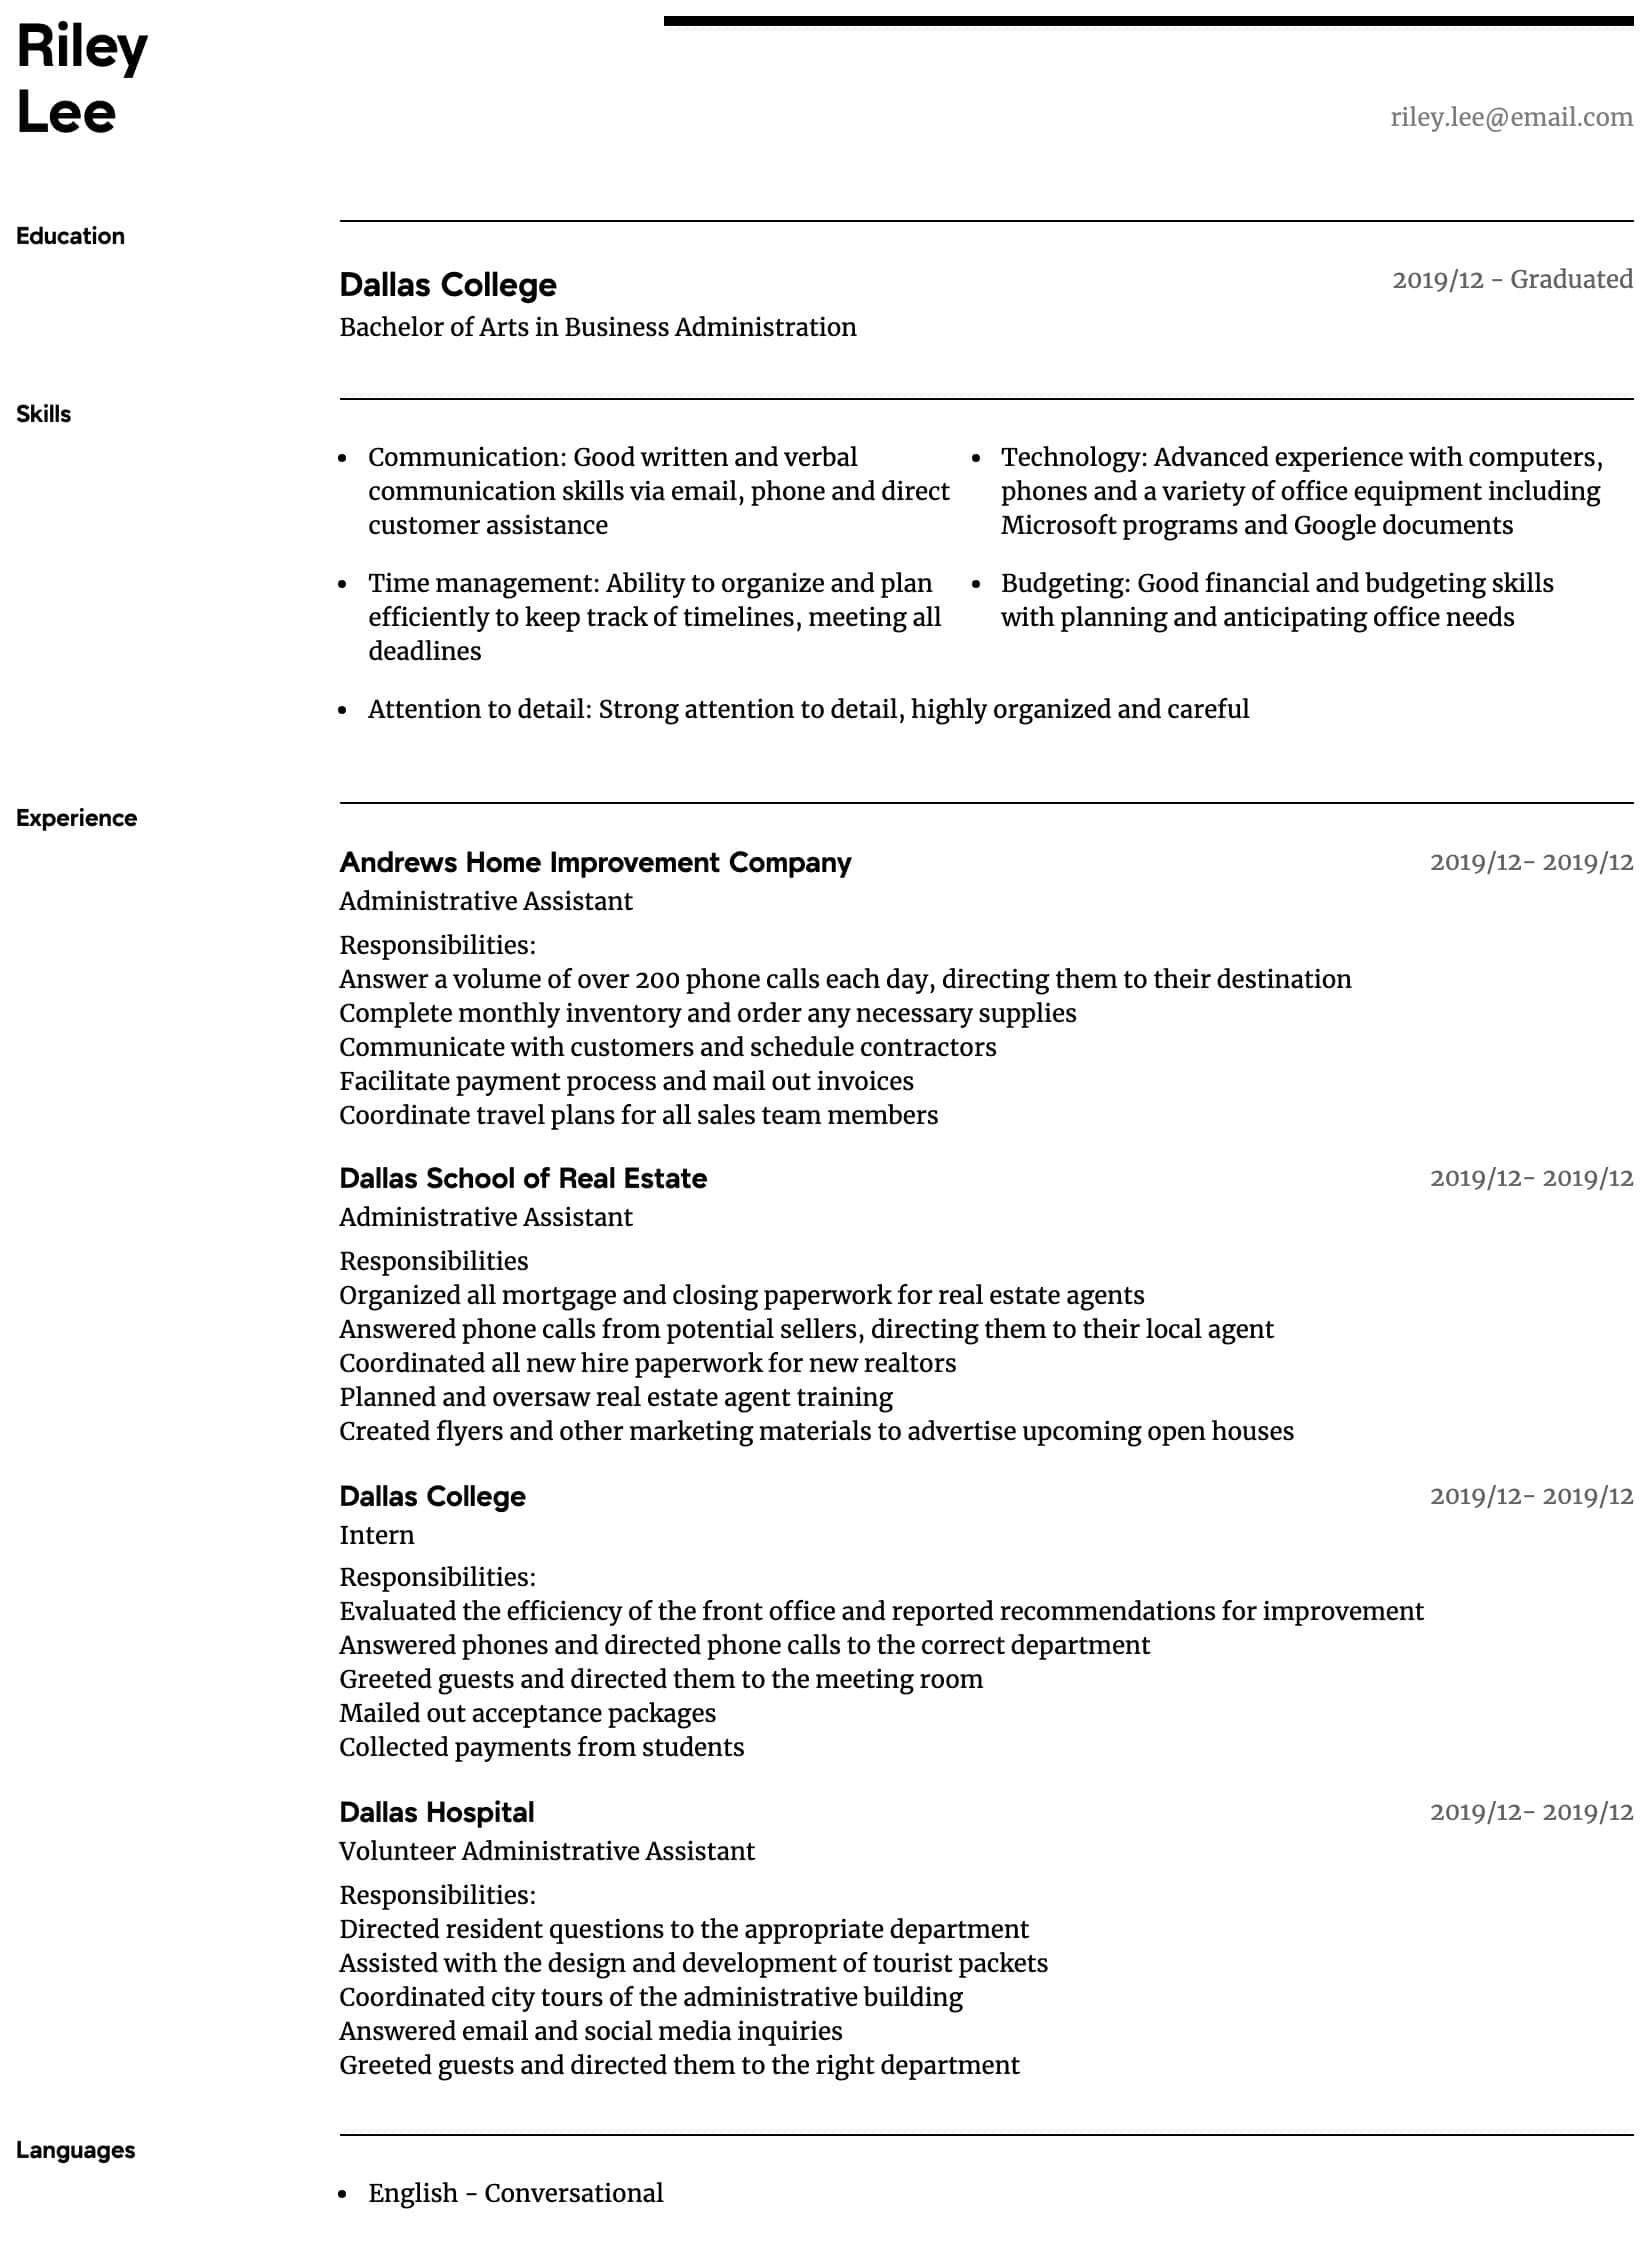 Sample Professional Resume for Administrative assistant Administrative assistant Resume Samples All Experience Levels …